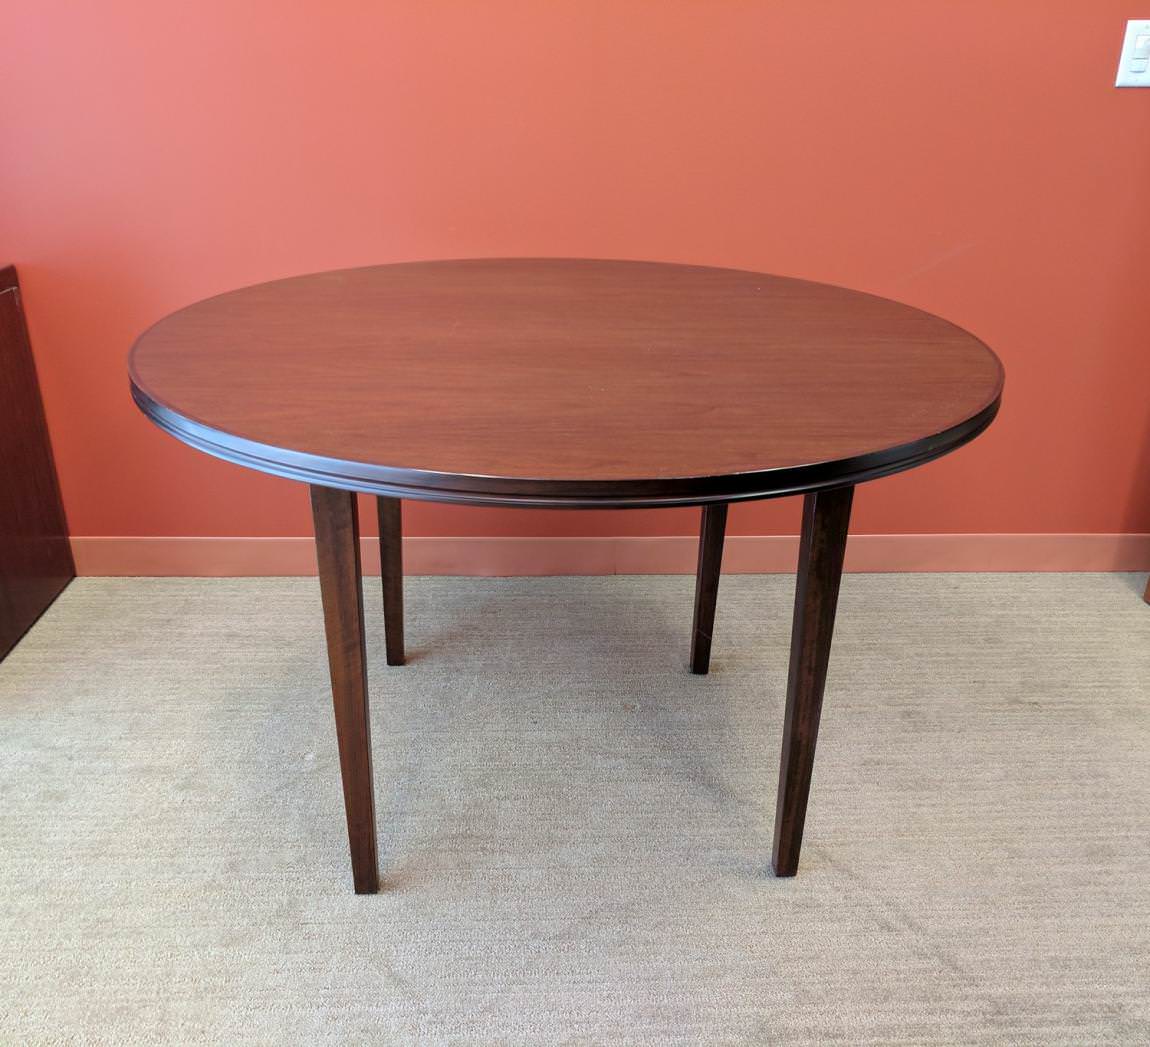 Round Solid Wood Walnut Table – 48 Inch Wide